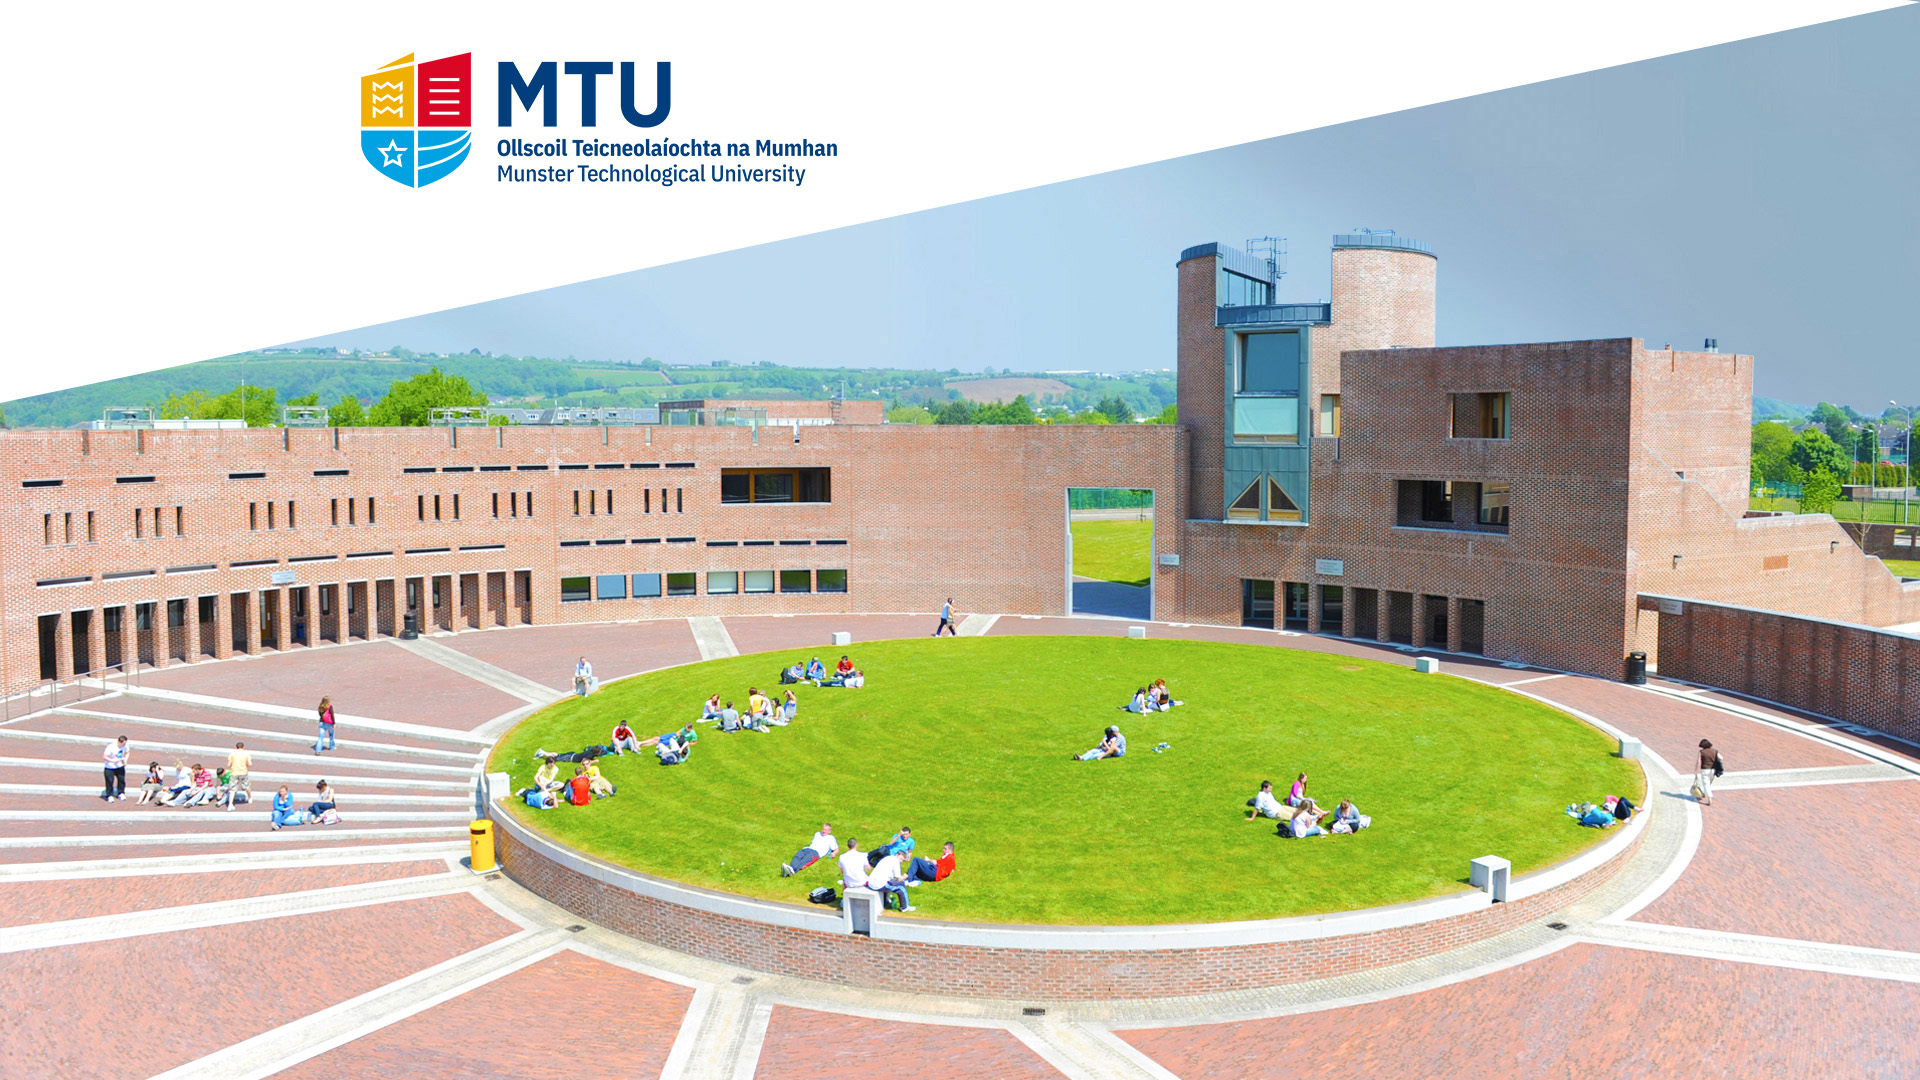 Munster Technological University campus with a circular grass area with students sitting around on the grass.